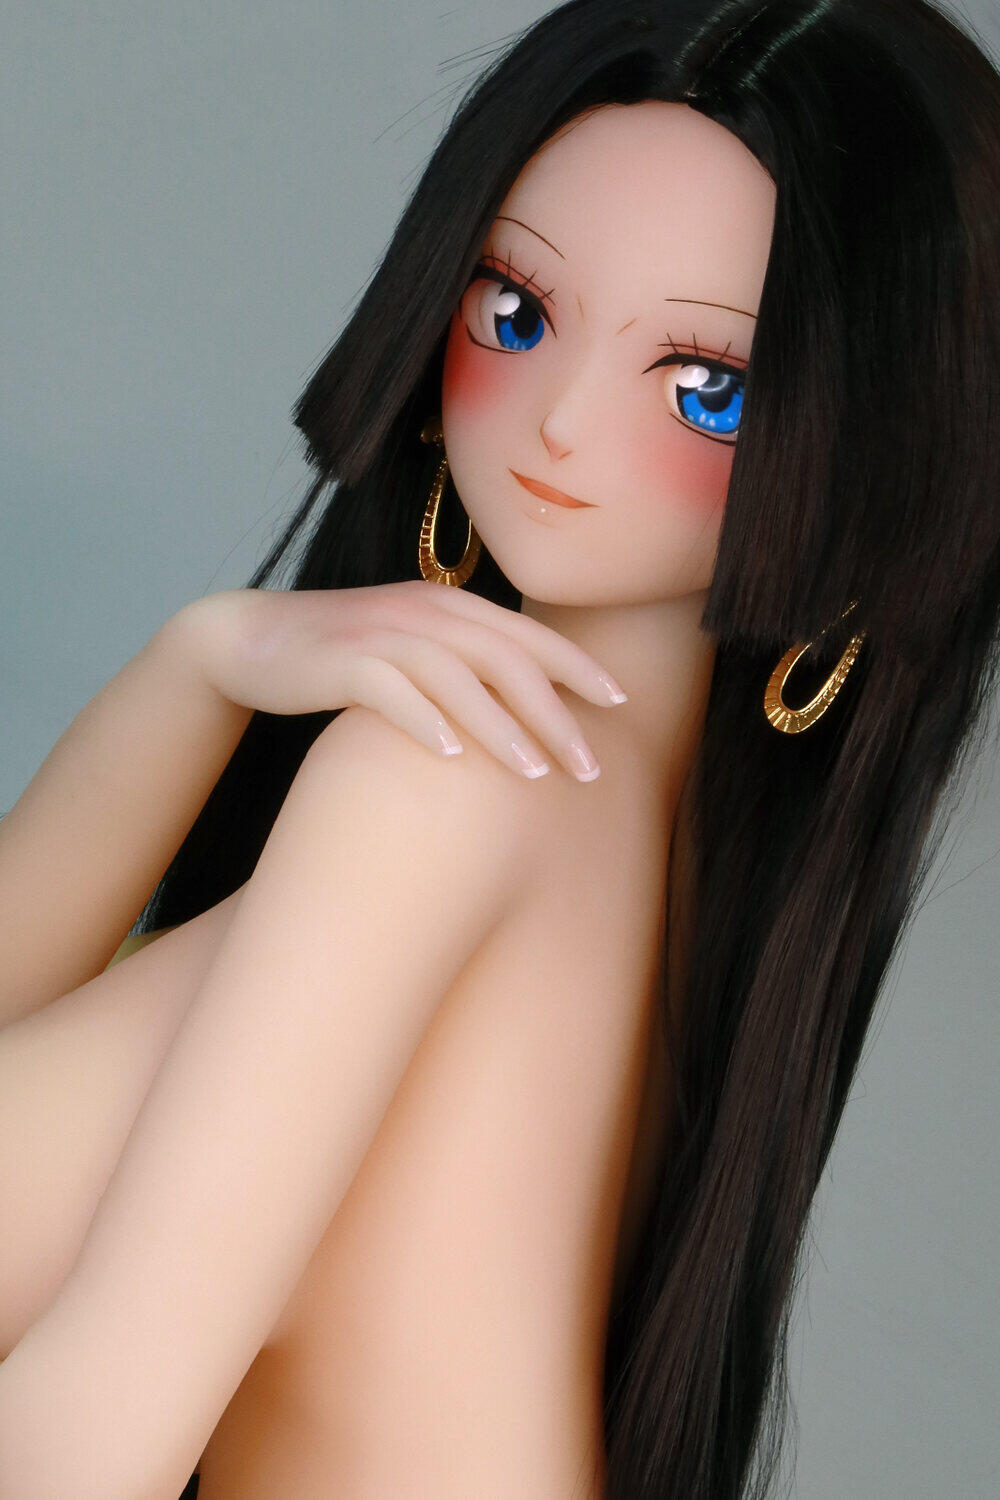 Justice-155cm(5ft1) Aotume Adult Doll H-Cup Normal Skin Tone Big Boobs TPE Dolls image12